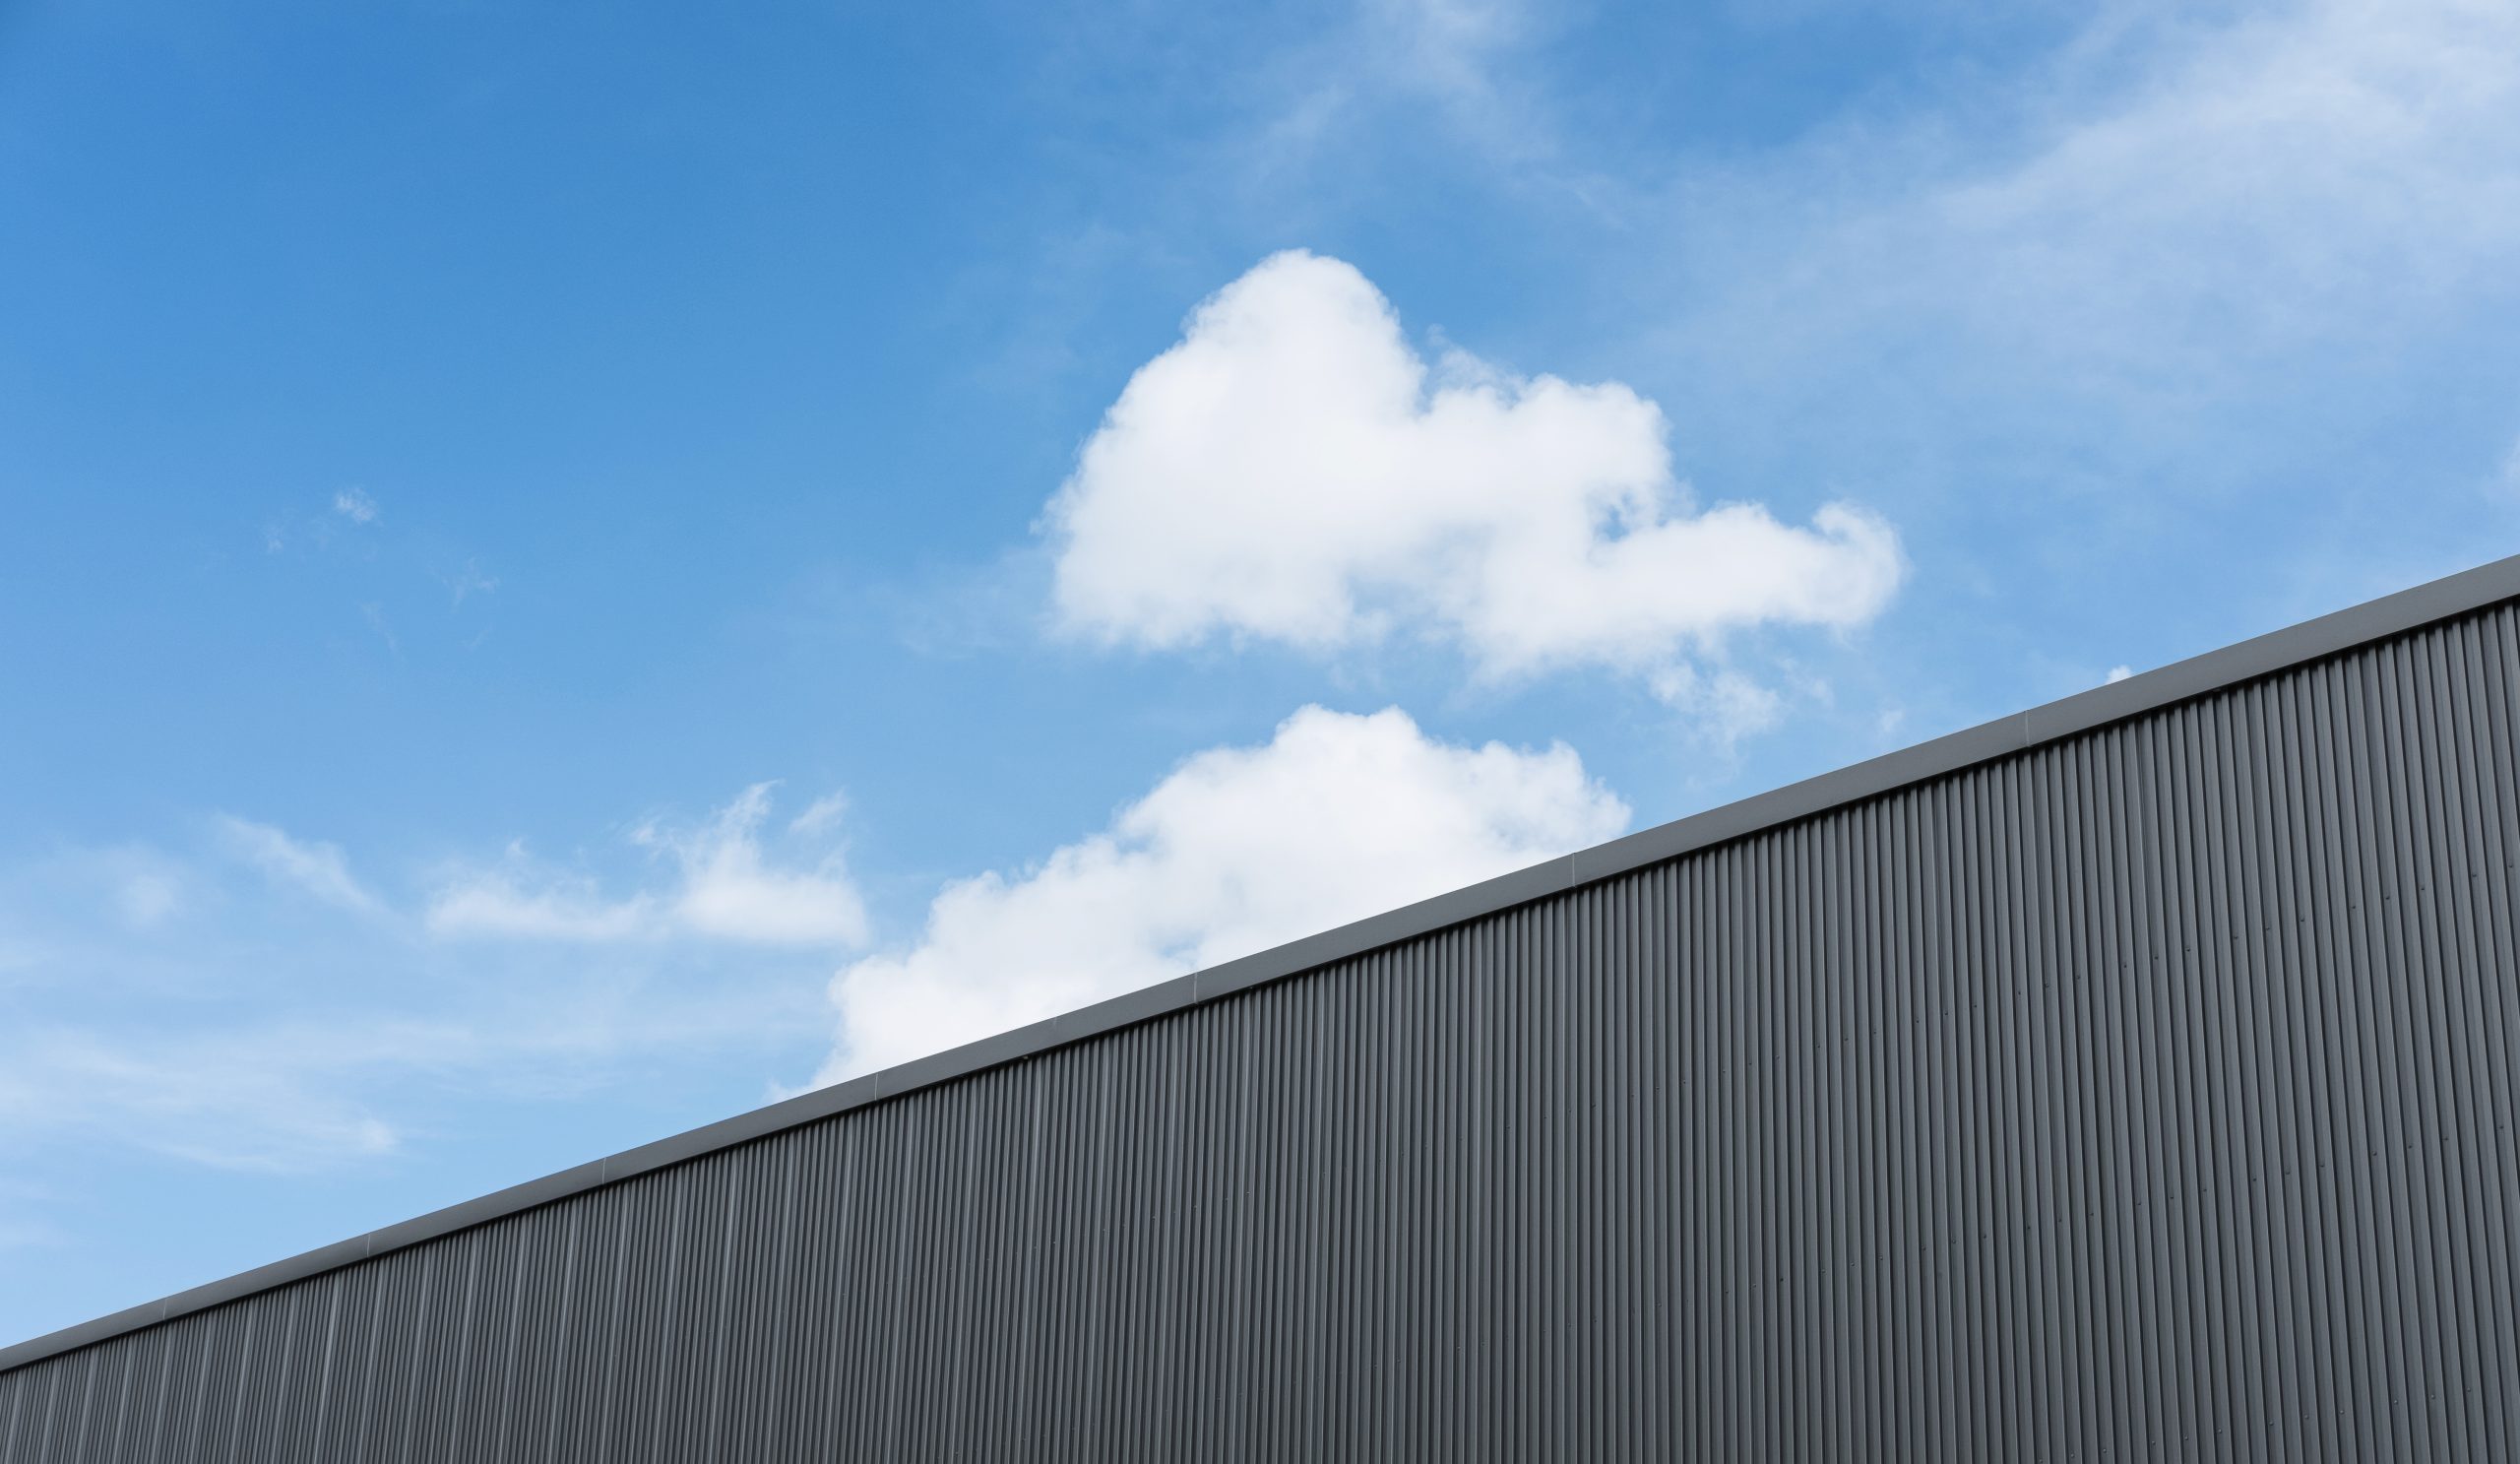 Corrugated factory industry wall on blue sky with clouds